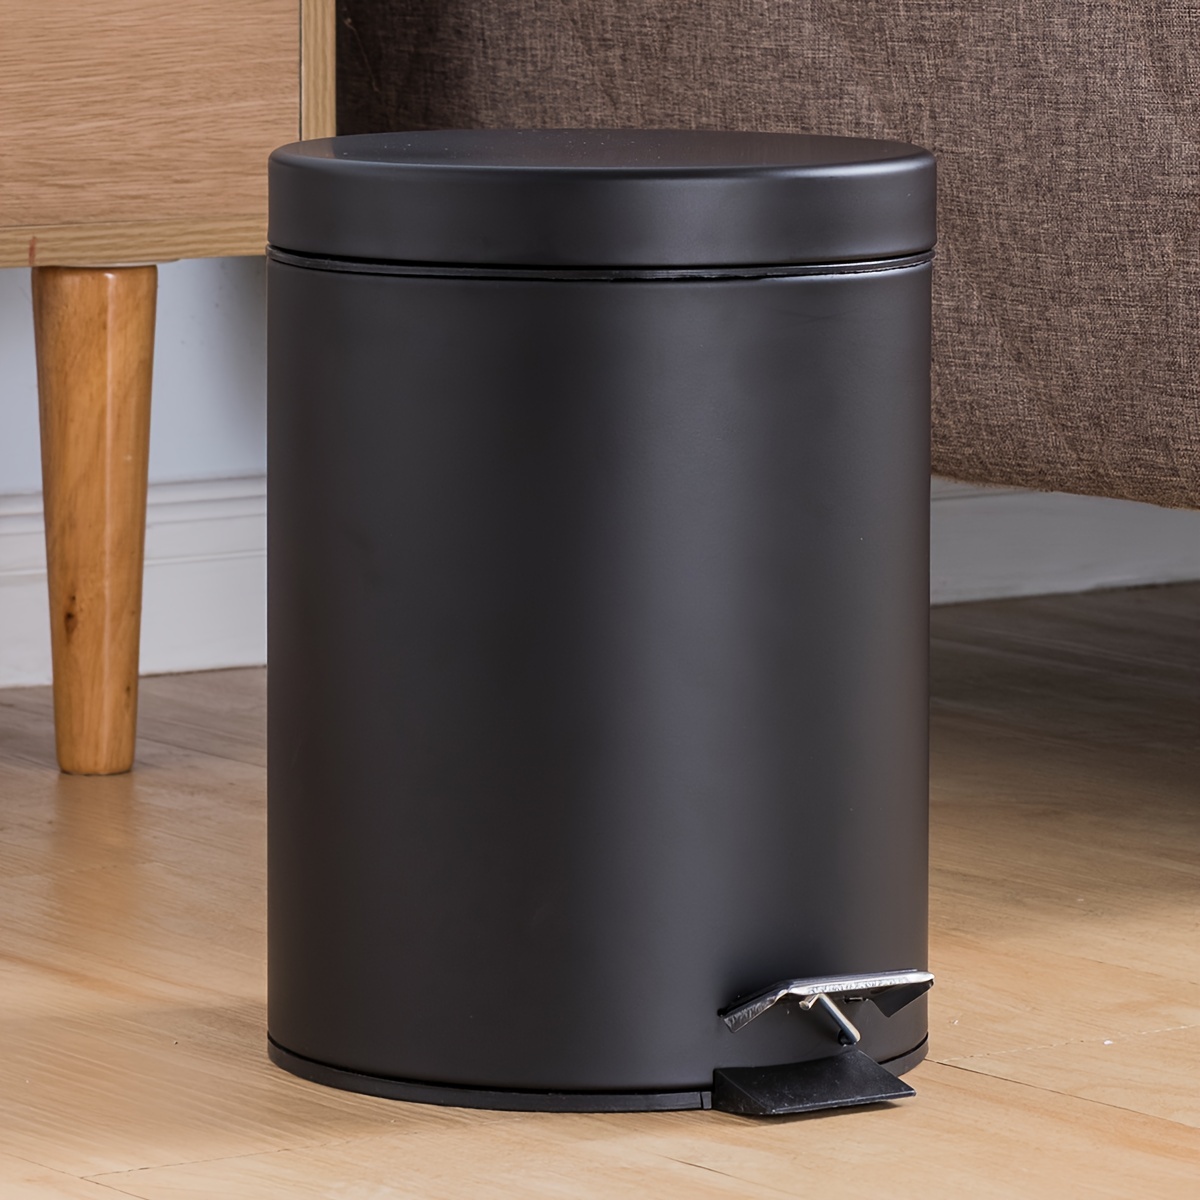 

1pc Foot Pedal Trash Can, Black Household Covered Trash Can For Living Room Bedroom Bathroom Toilet Kitchen Dorm Office, Metal Rubbish Can, 3l